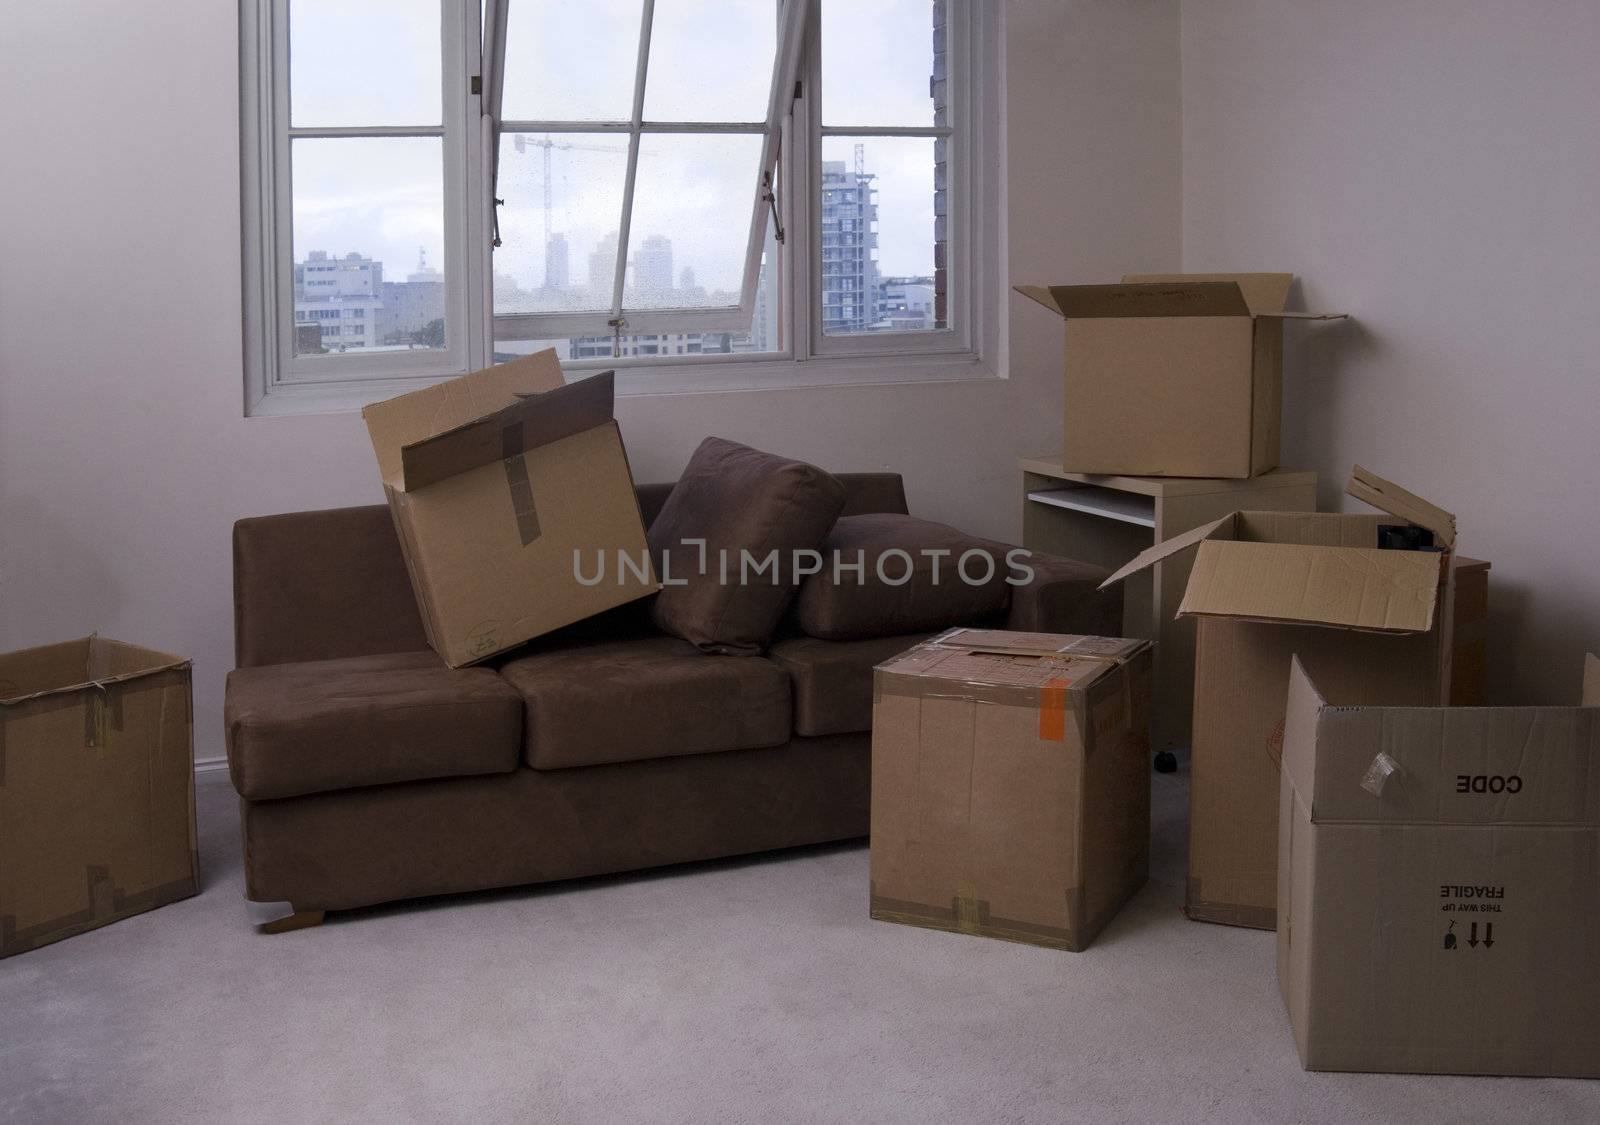 unpacking boxes after moving into a new apartment